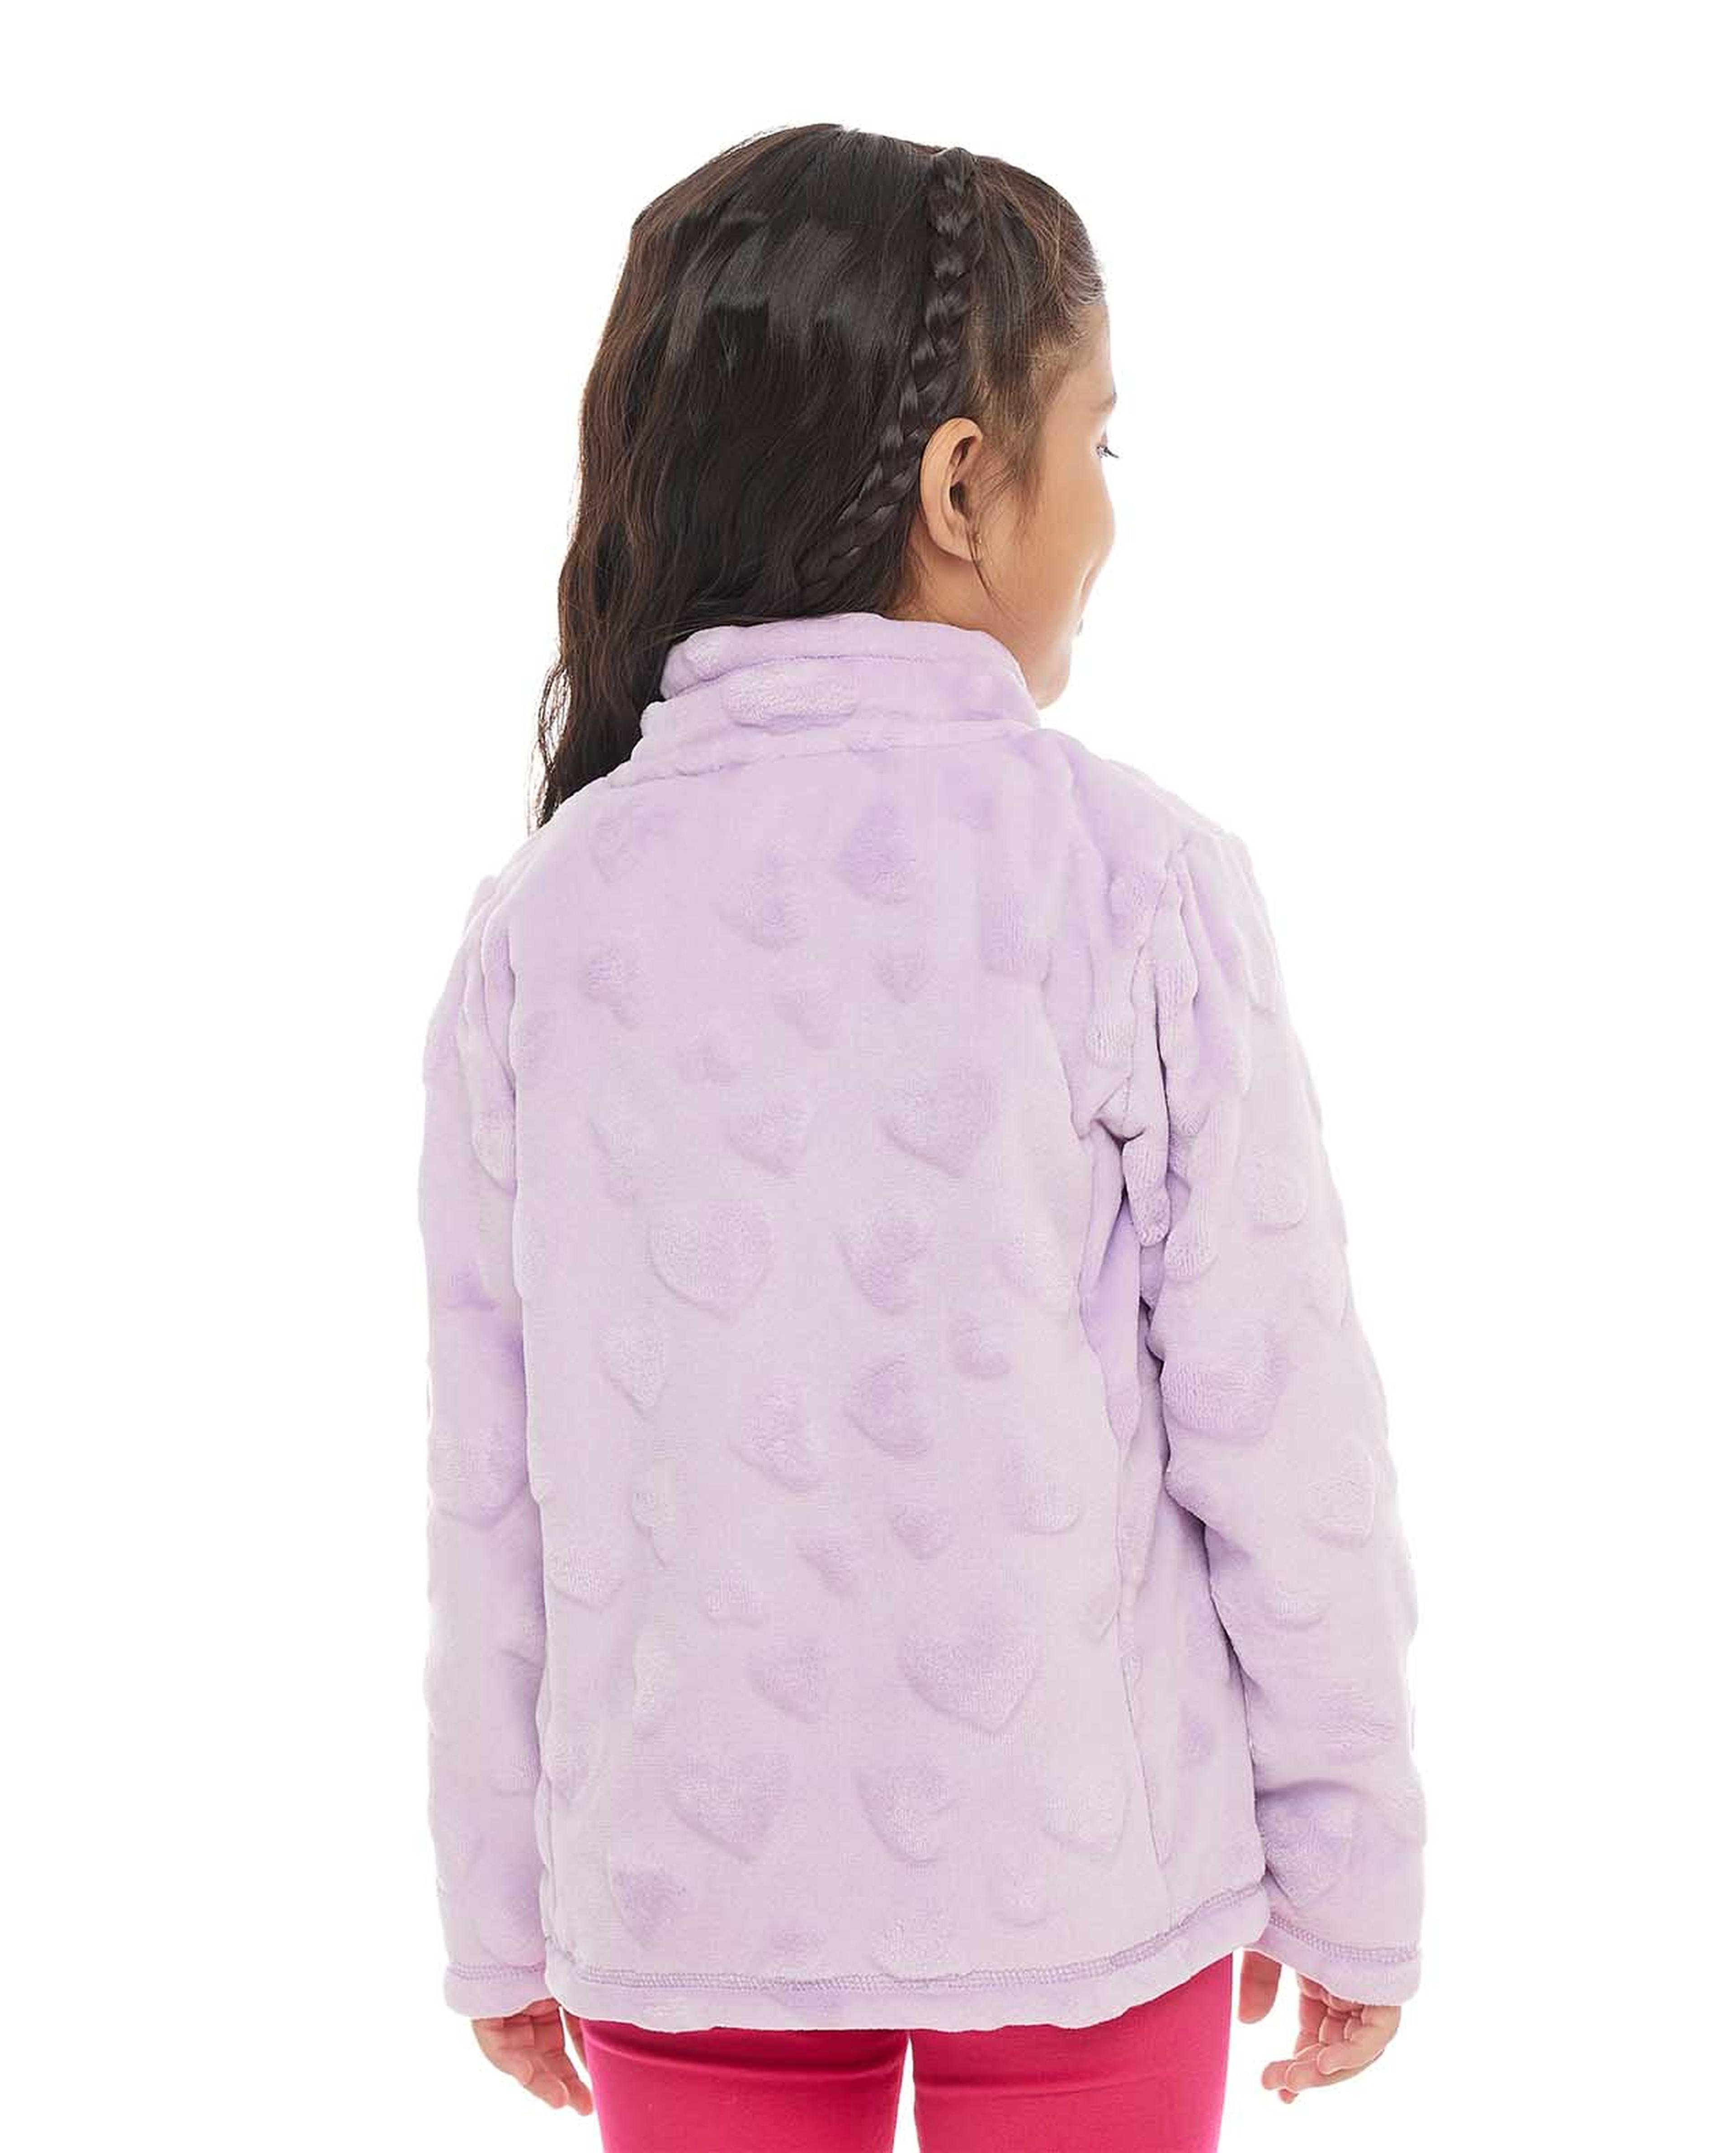 Plush Jacket with Zipper Front